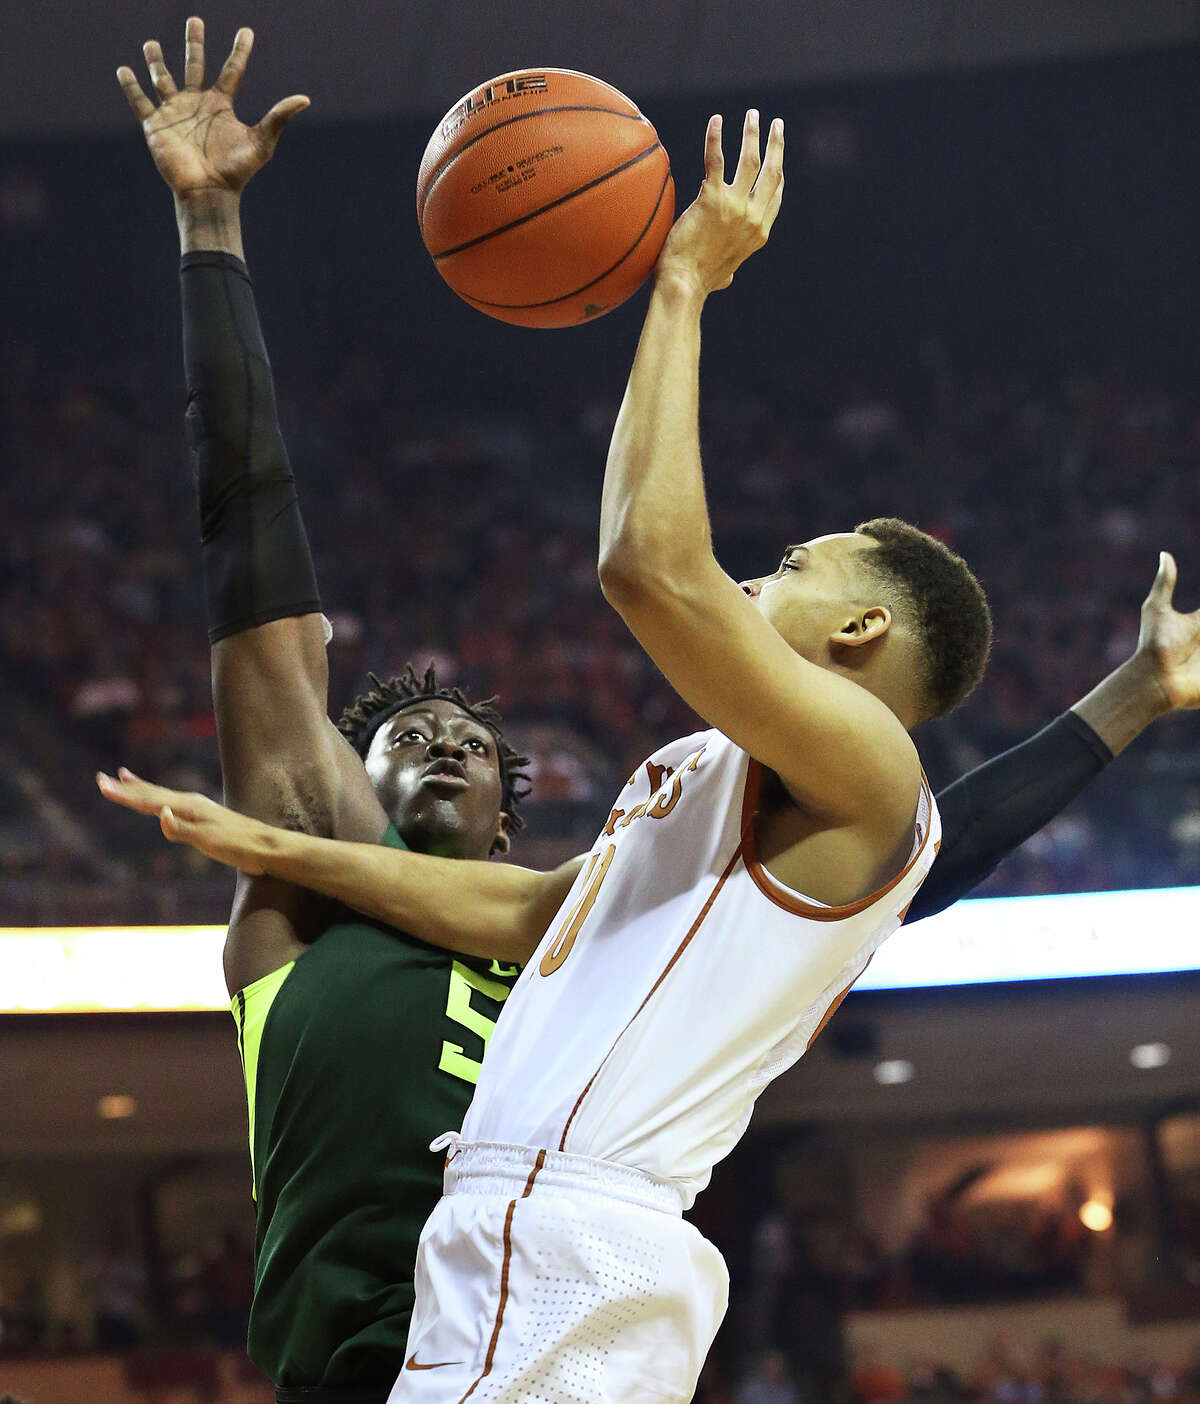 Eric Davis loses control under a block threat from Bear forward Johnathan Motley as UT hosts Baylor in men's basketball at the Erwin Center on February 20, 2016.